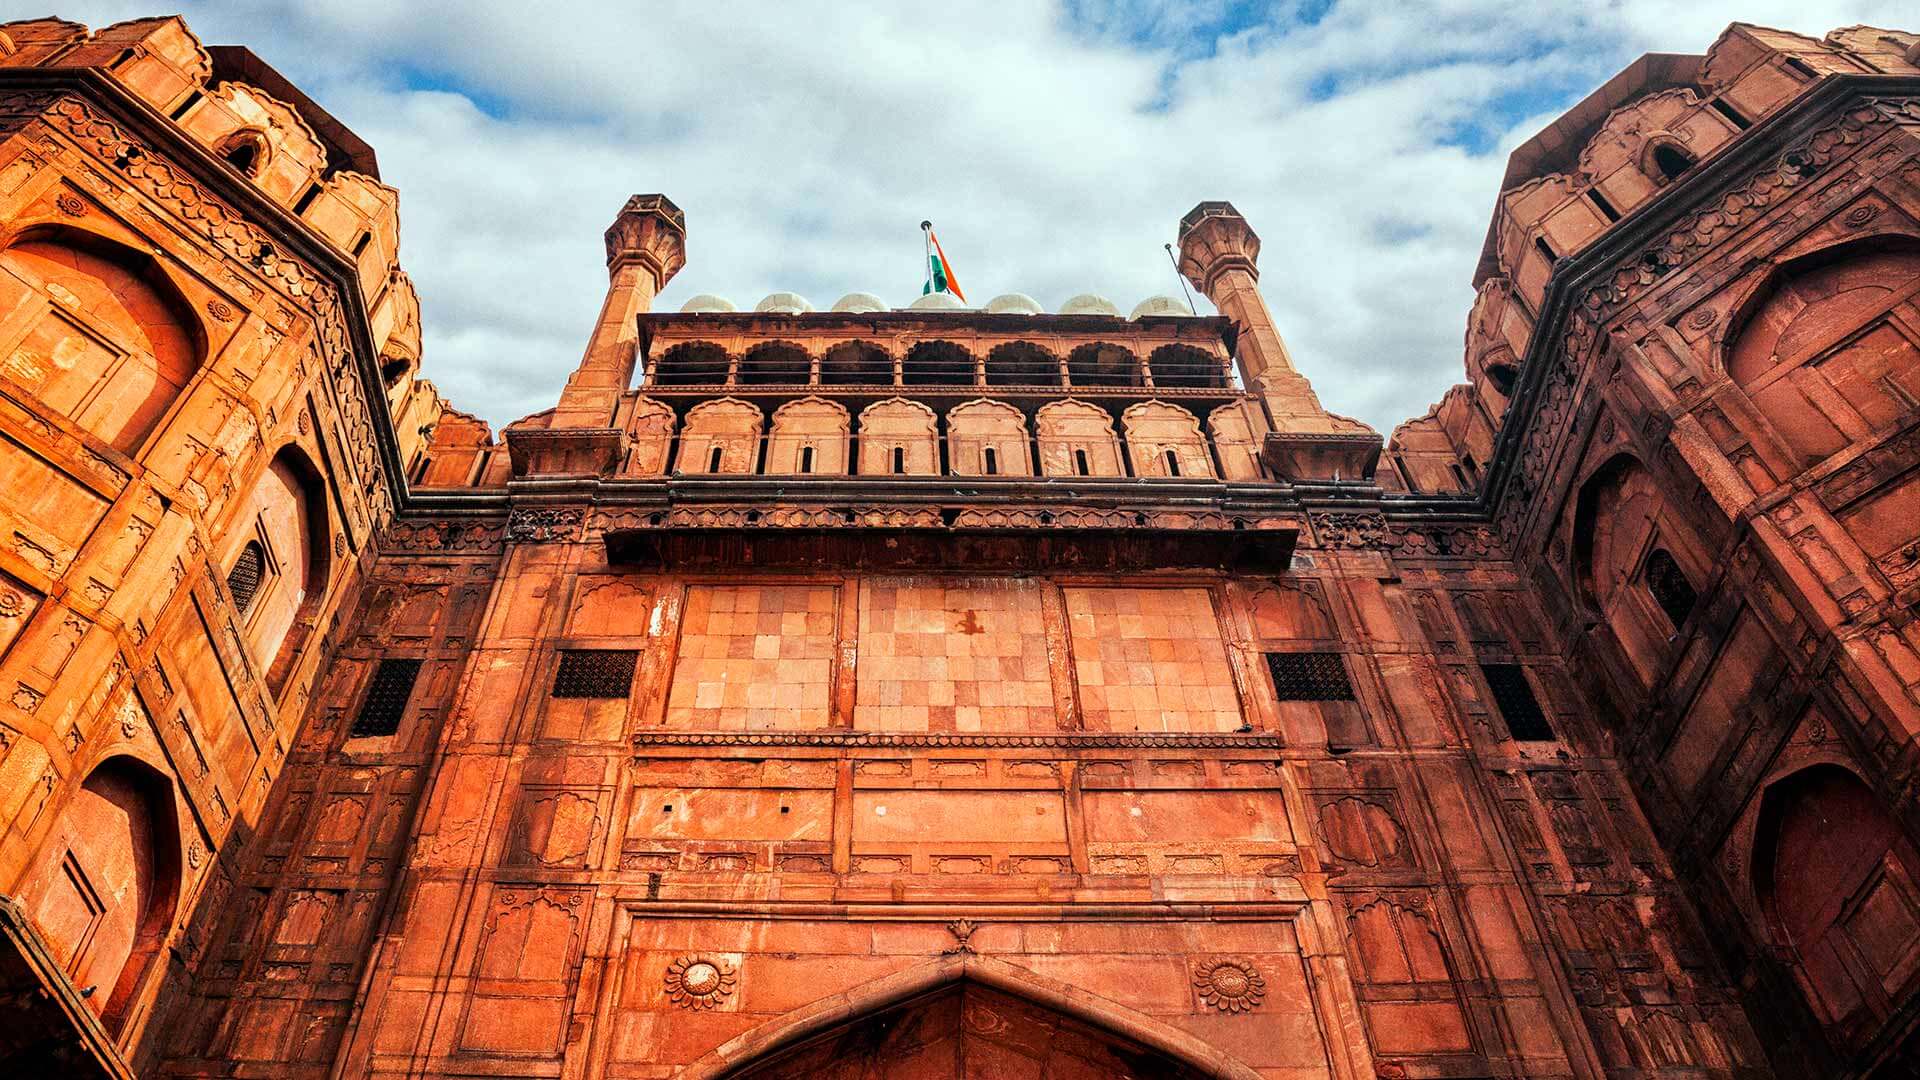 Entrance to the Red Fort, Delhi